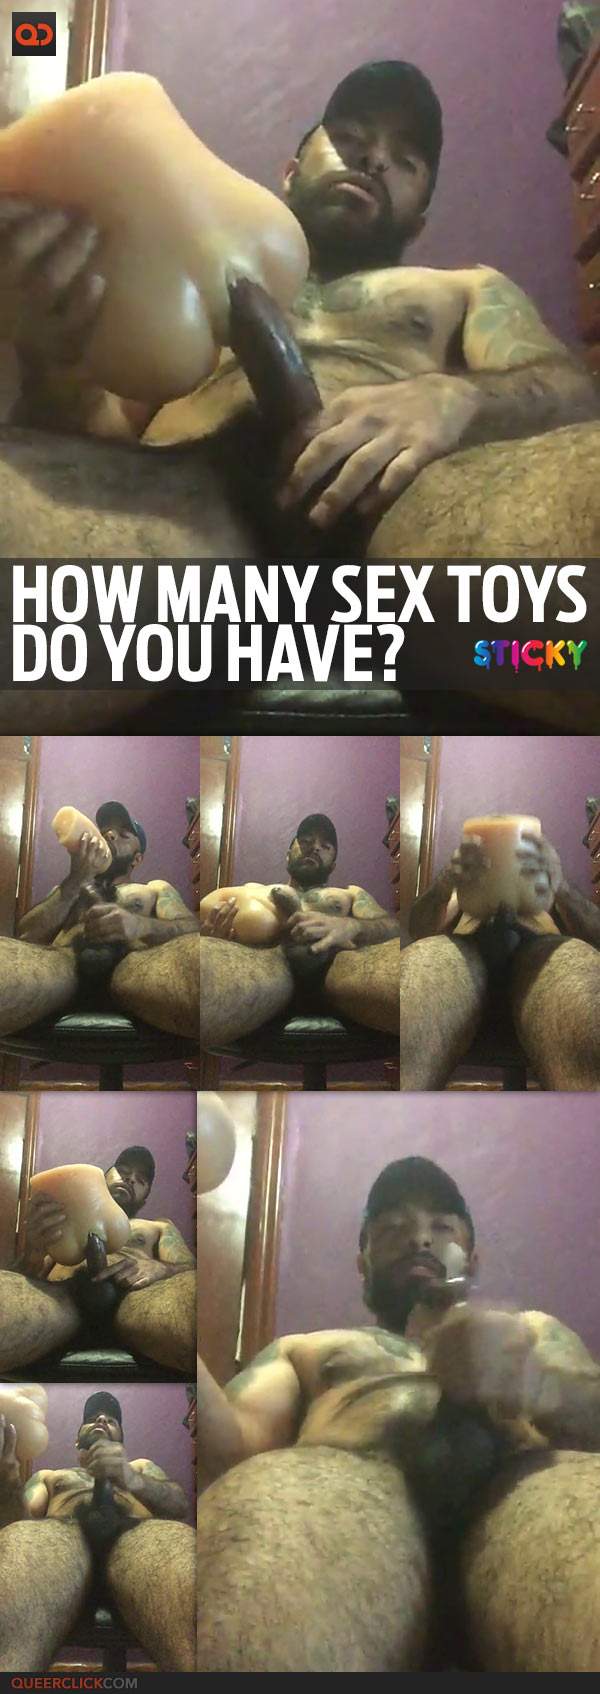 qc-sticky-how_many_sex_toys_do_you_have-teaser